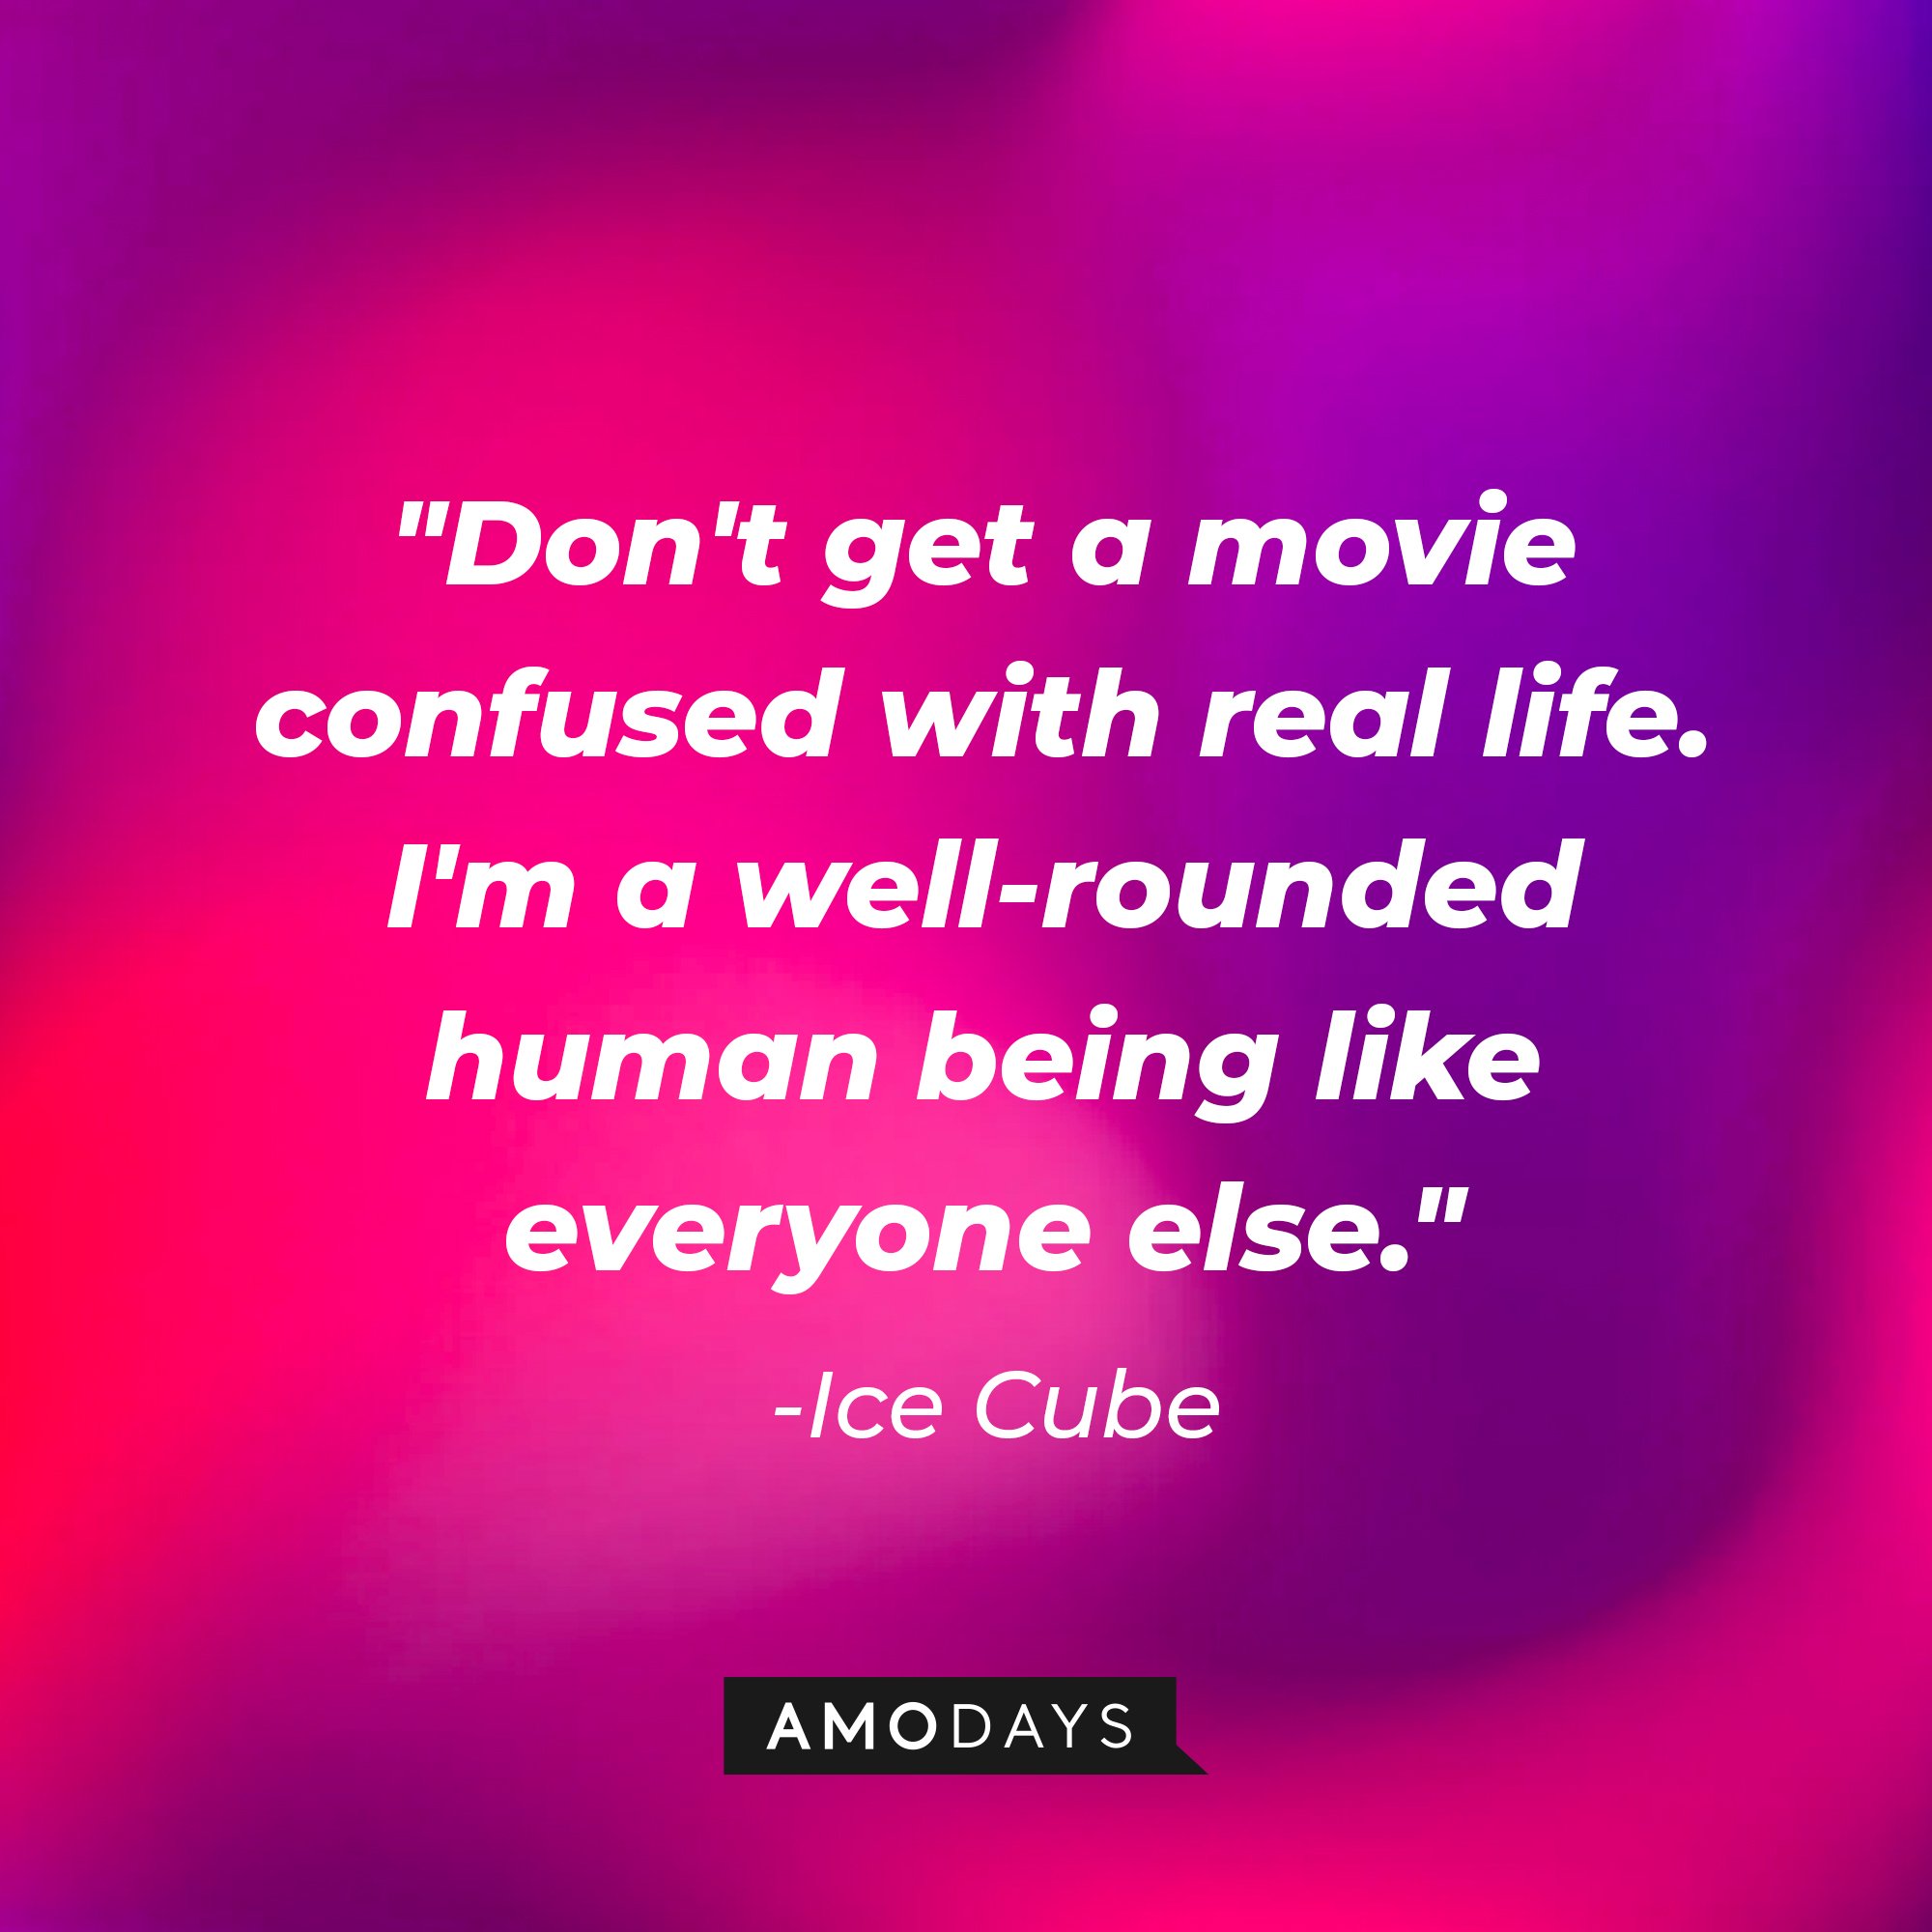 Ice Cube's quote: "Don't get a movie confused with real life. I'm a well-rounded human being like everyone else." — Ice Cube | Image: AmoDays